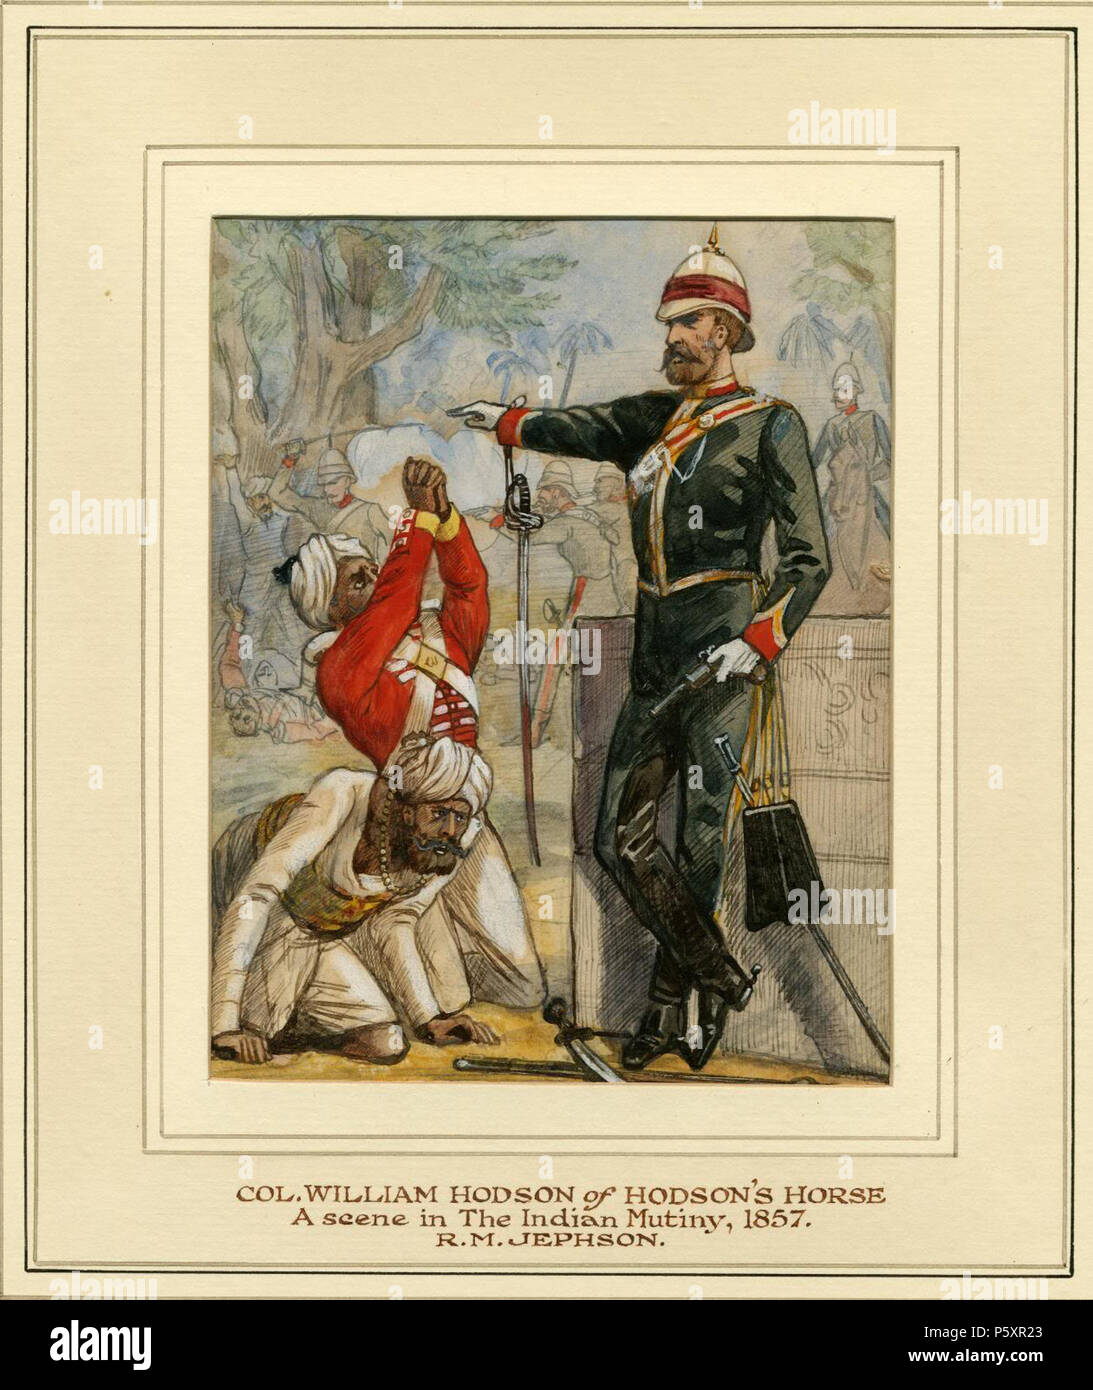 N/A. English: William Hodoson presented the heads of the two princes Mirza Mughal and Mirza Khizr Sultan. Unknown date. R.M.Jephson 365 COL.WILLIAM HODSON of HODSON'S HORSE A scene in The Indian Mutiny, 1857 Stock Photo